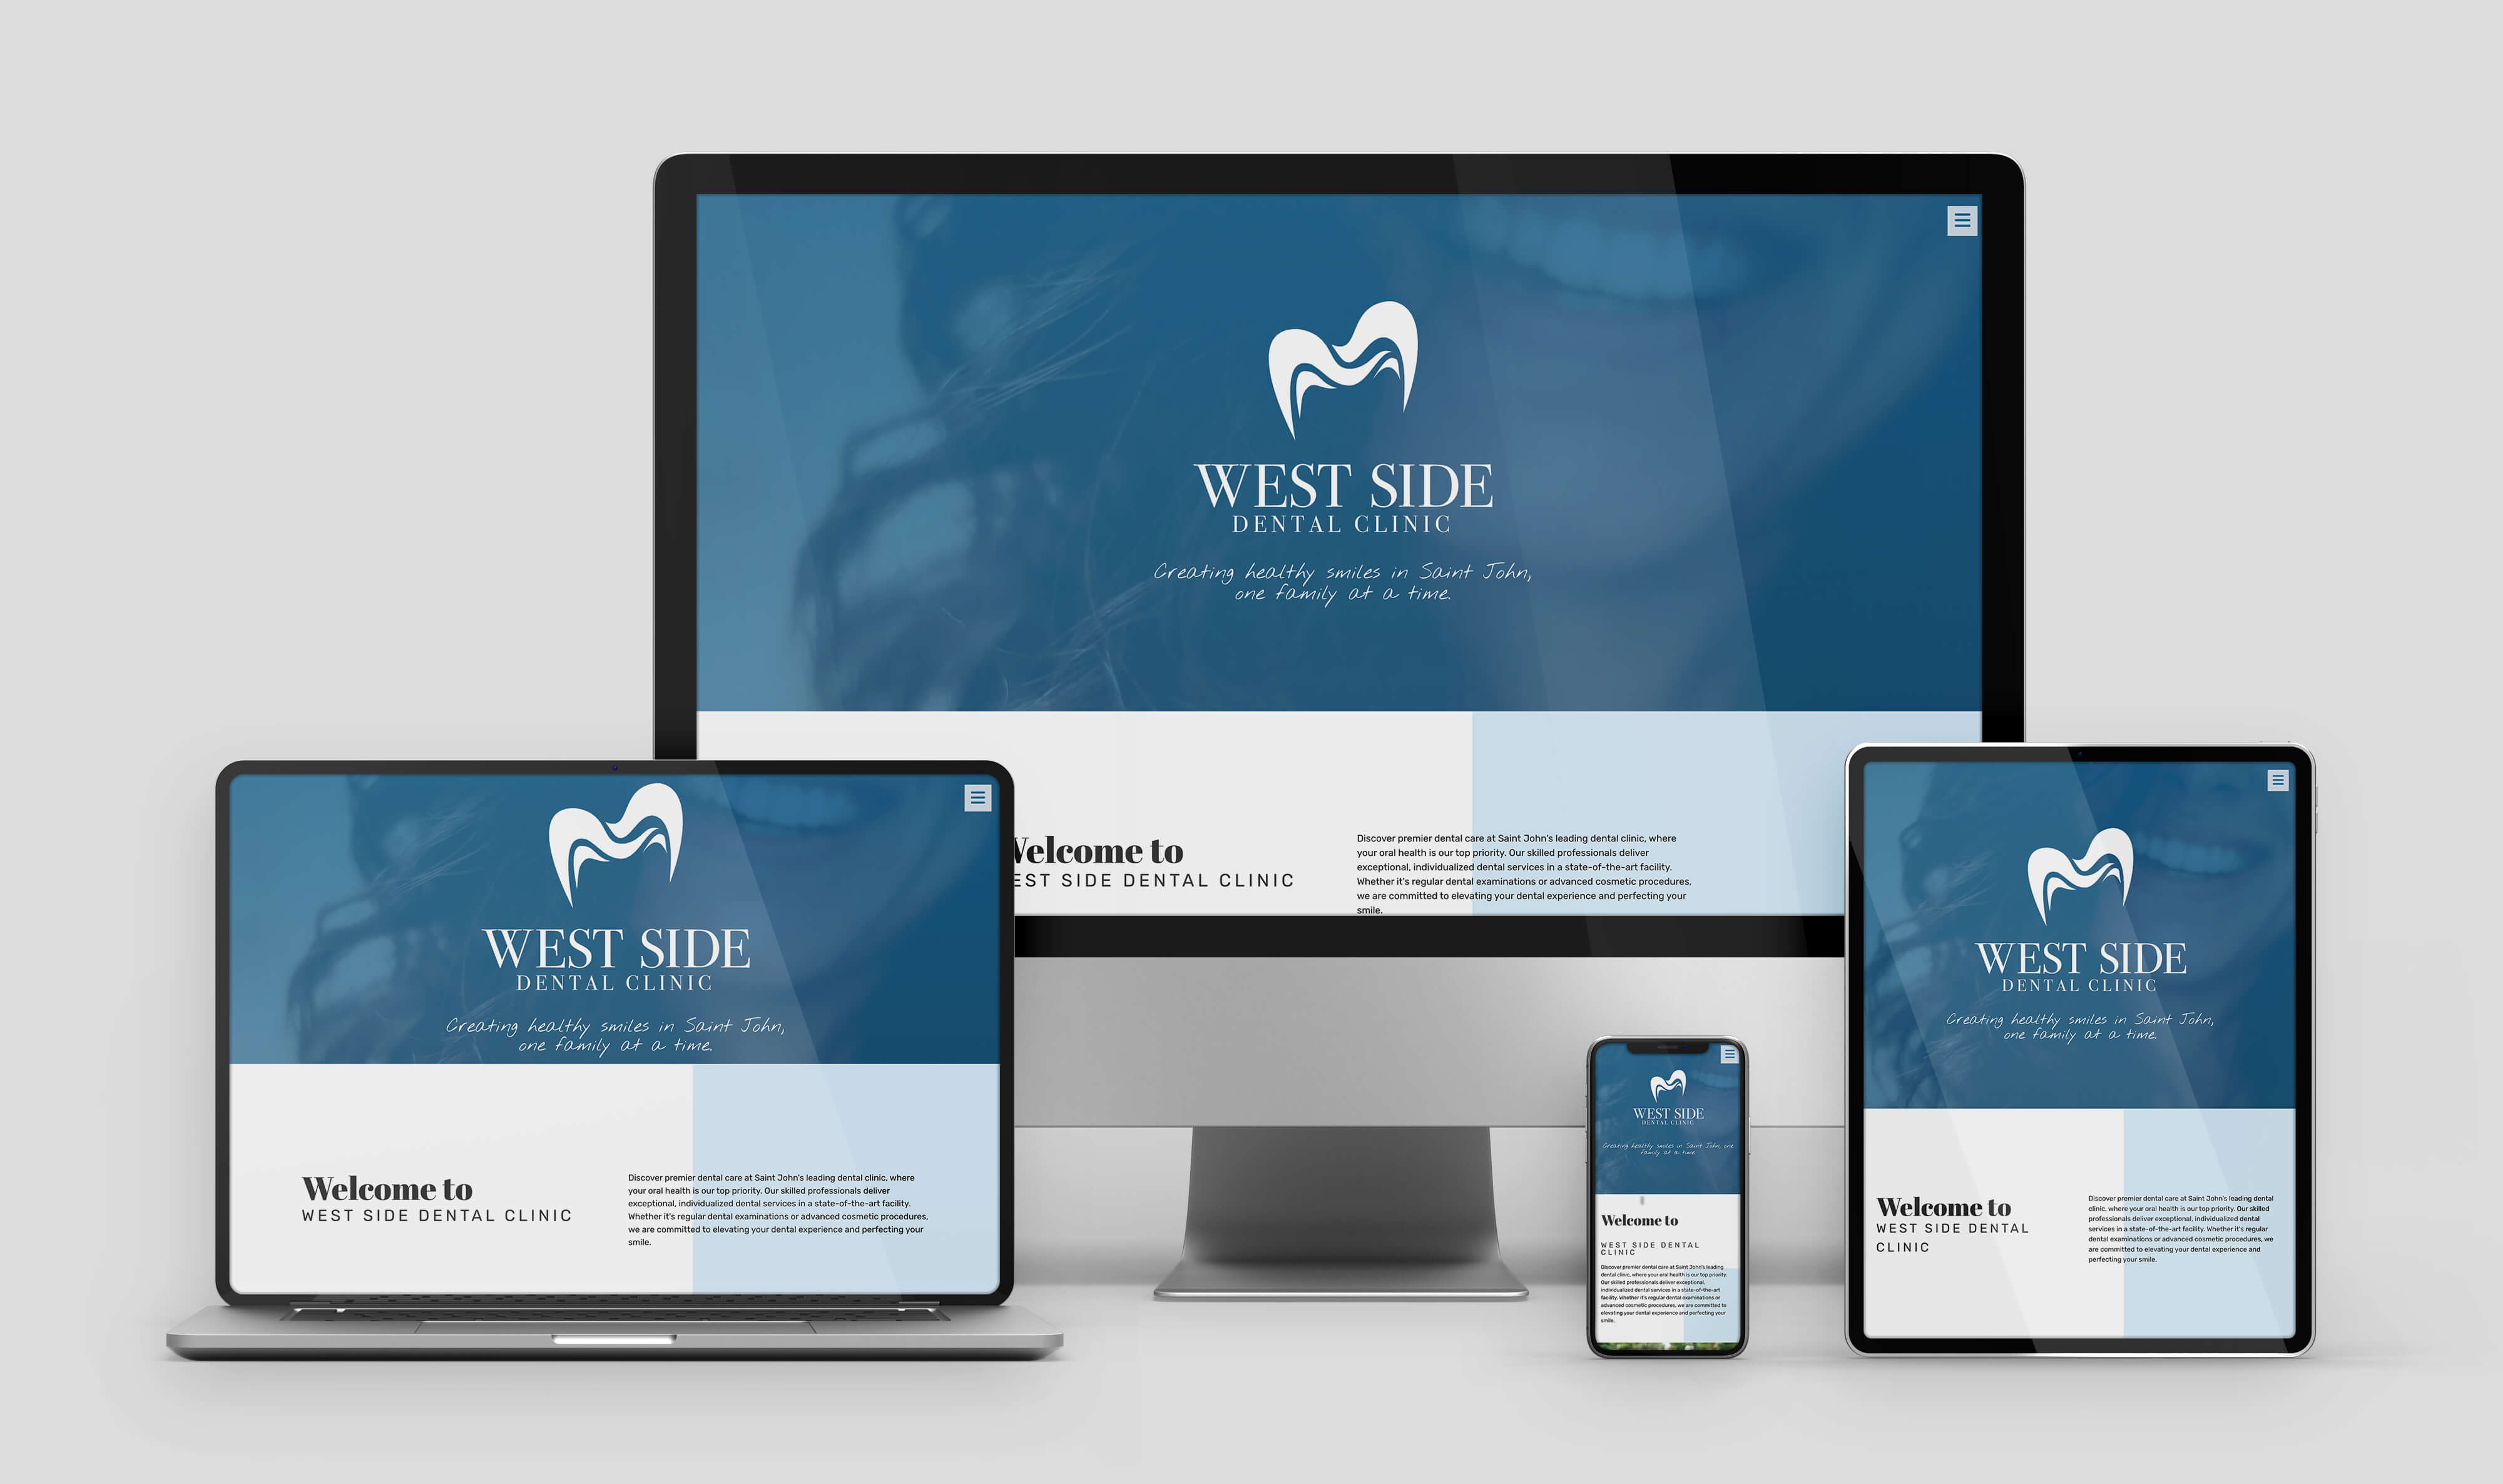 West Side Dental Clinic design on multiple devices